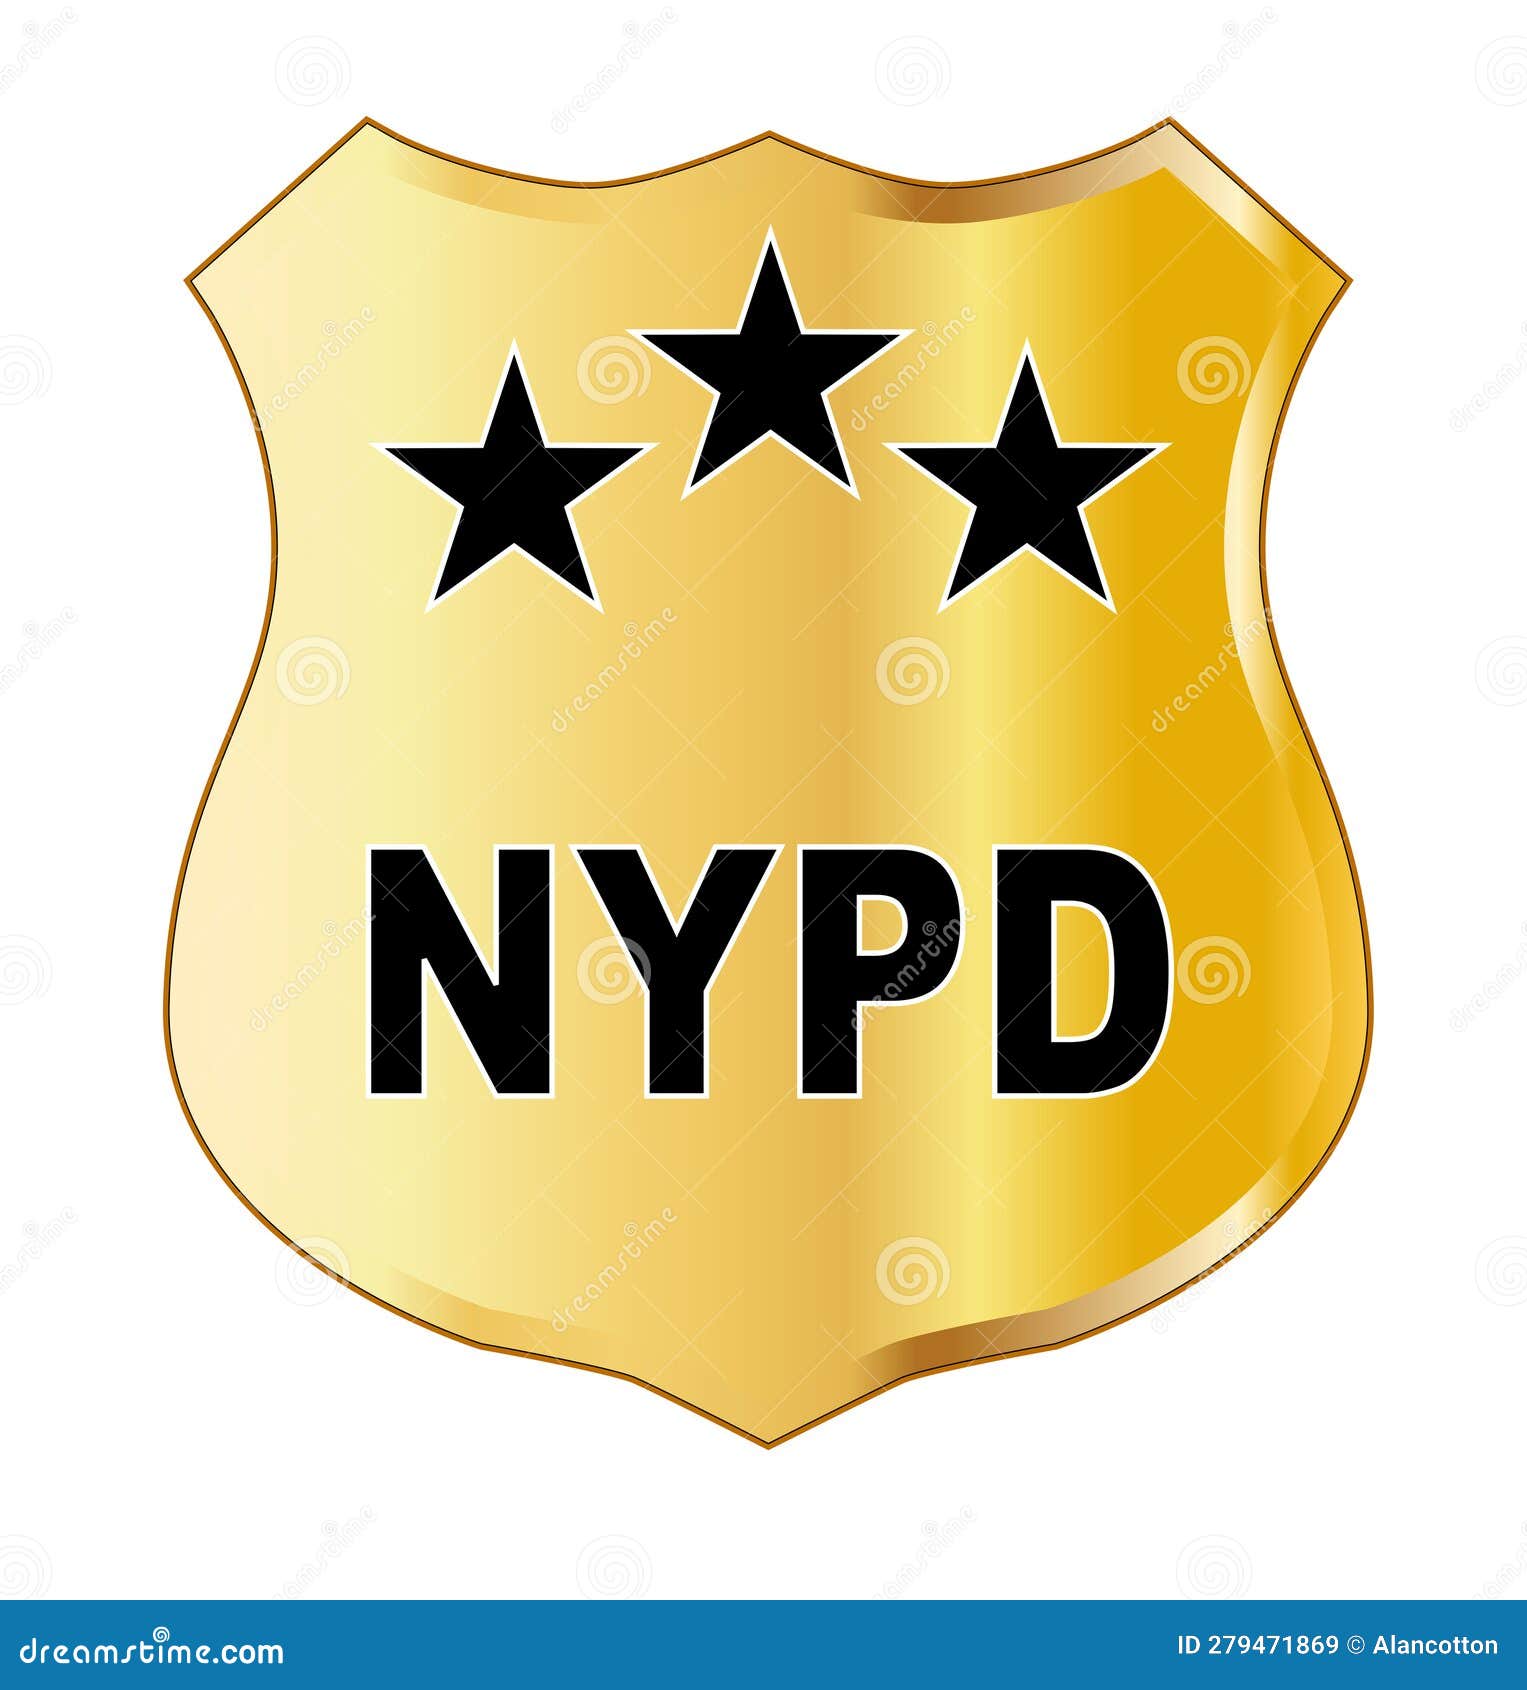 nypd spoof law enforcement badge